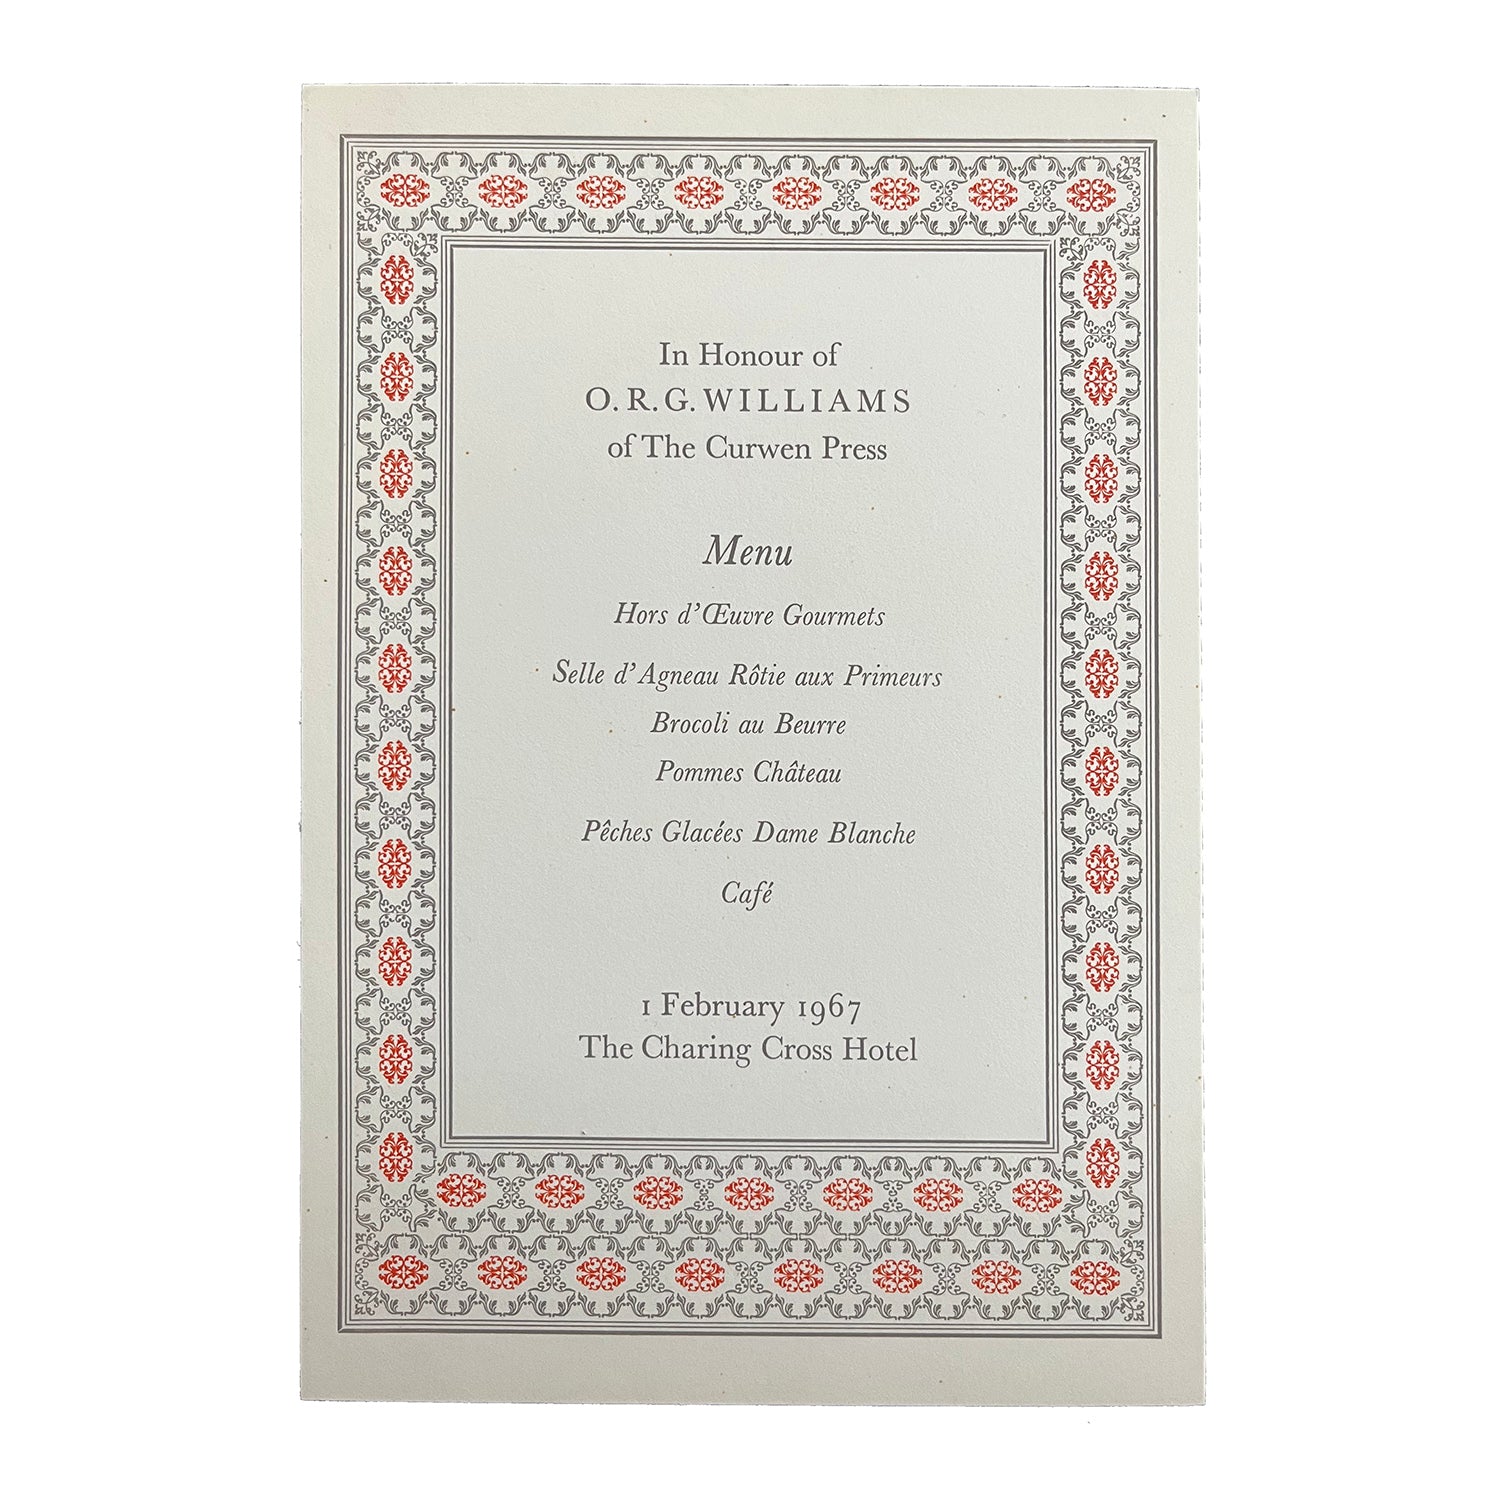 original menu, designed and printed by the Curwen Press for the retirement of ORG Williams, Charing Cross Hotel, 1967. 